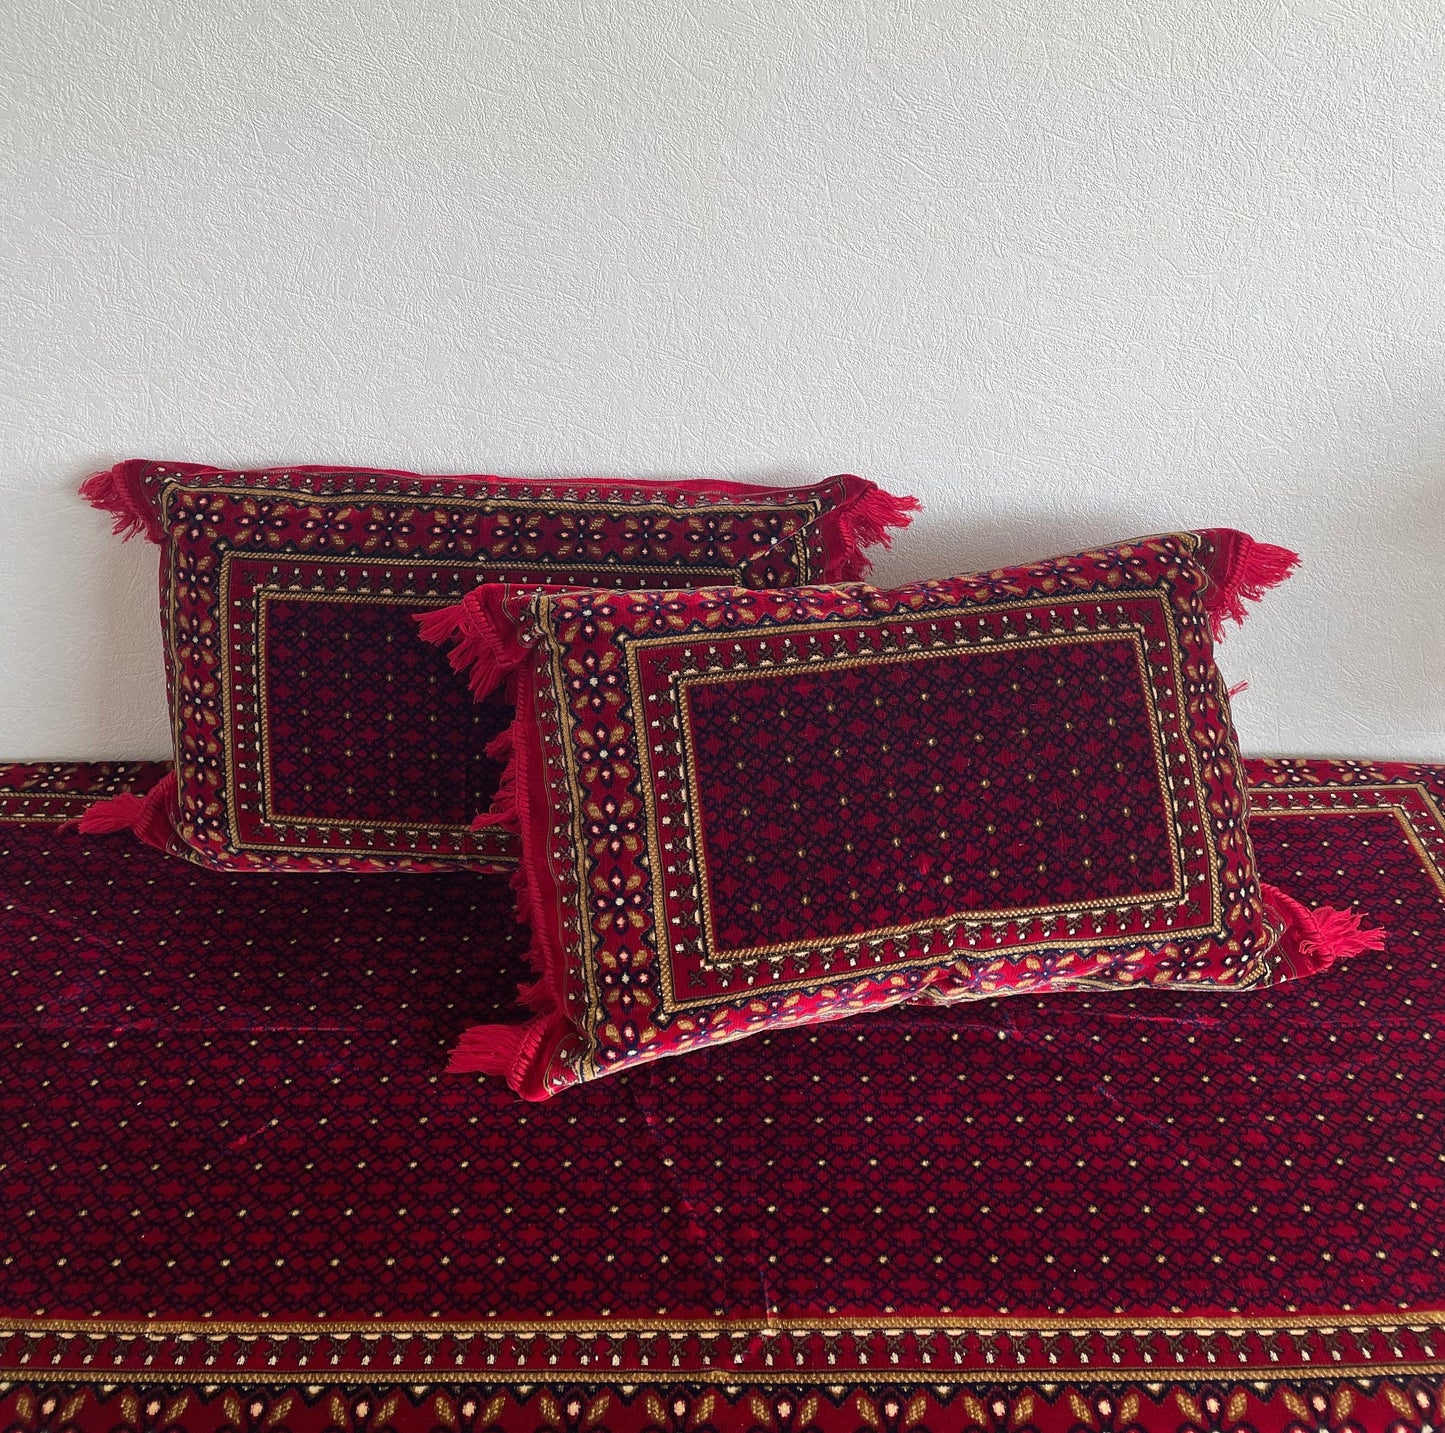 Afghan toshak 1 floor sofa + 2 pillows covers gift for mum, Arabic Moroccan Diwan Majlis Jalsa, gift for new afghan couple (cover only)